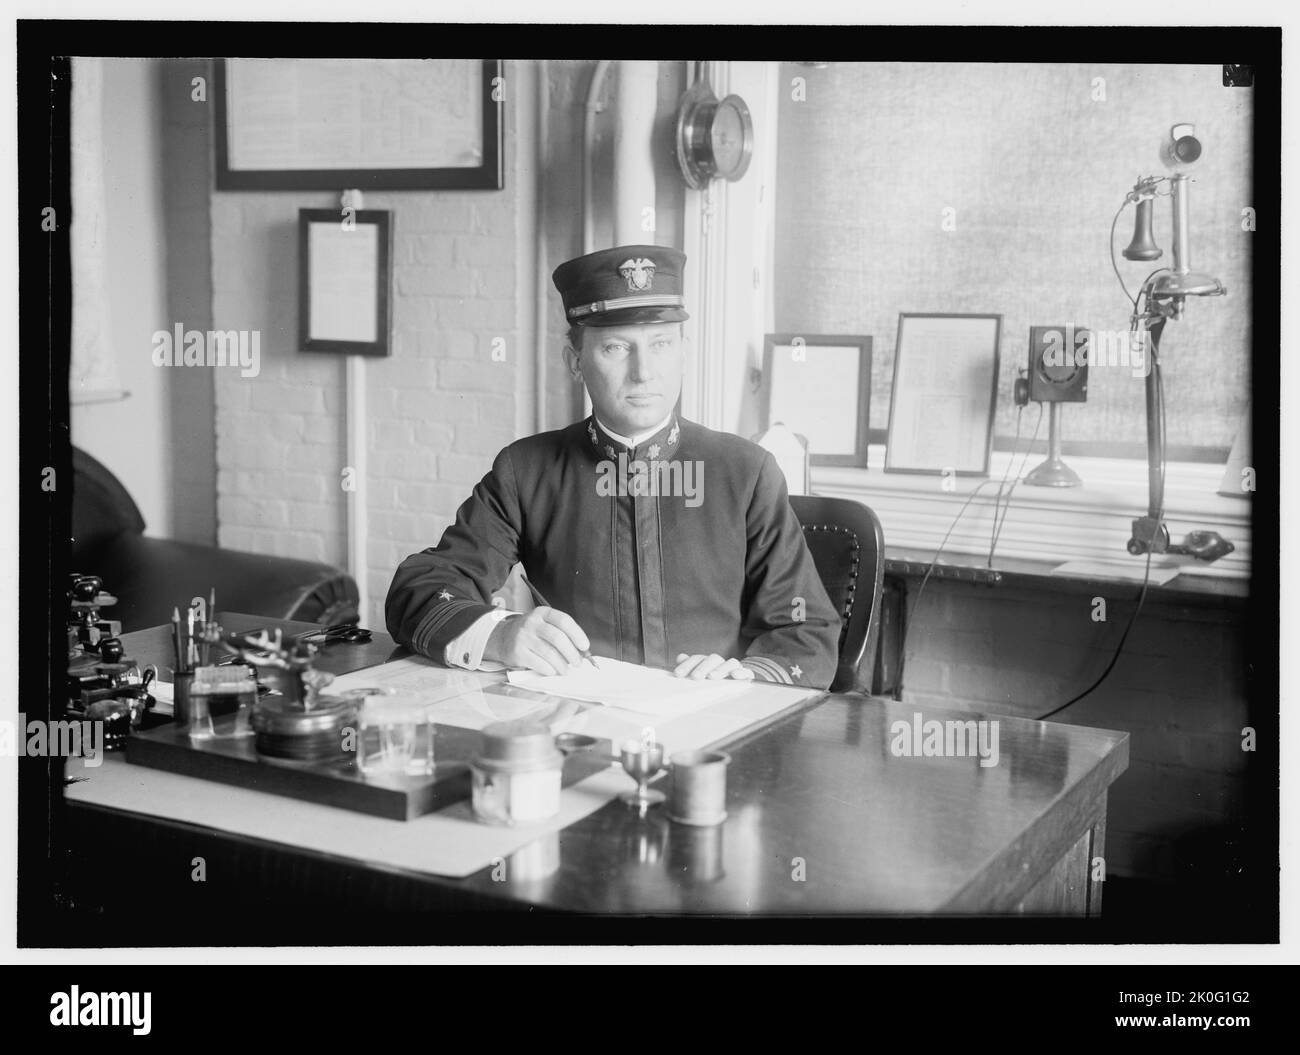 Captain William, between 1910 and 1917. Man in uniform writing at a desk. Stock Photo